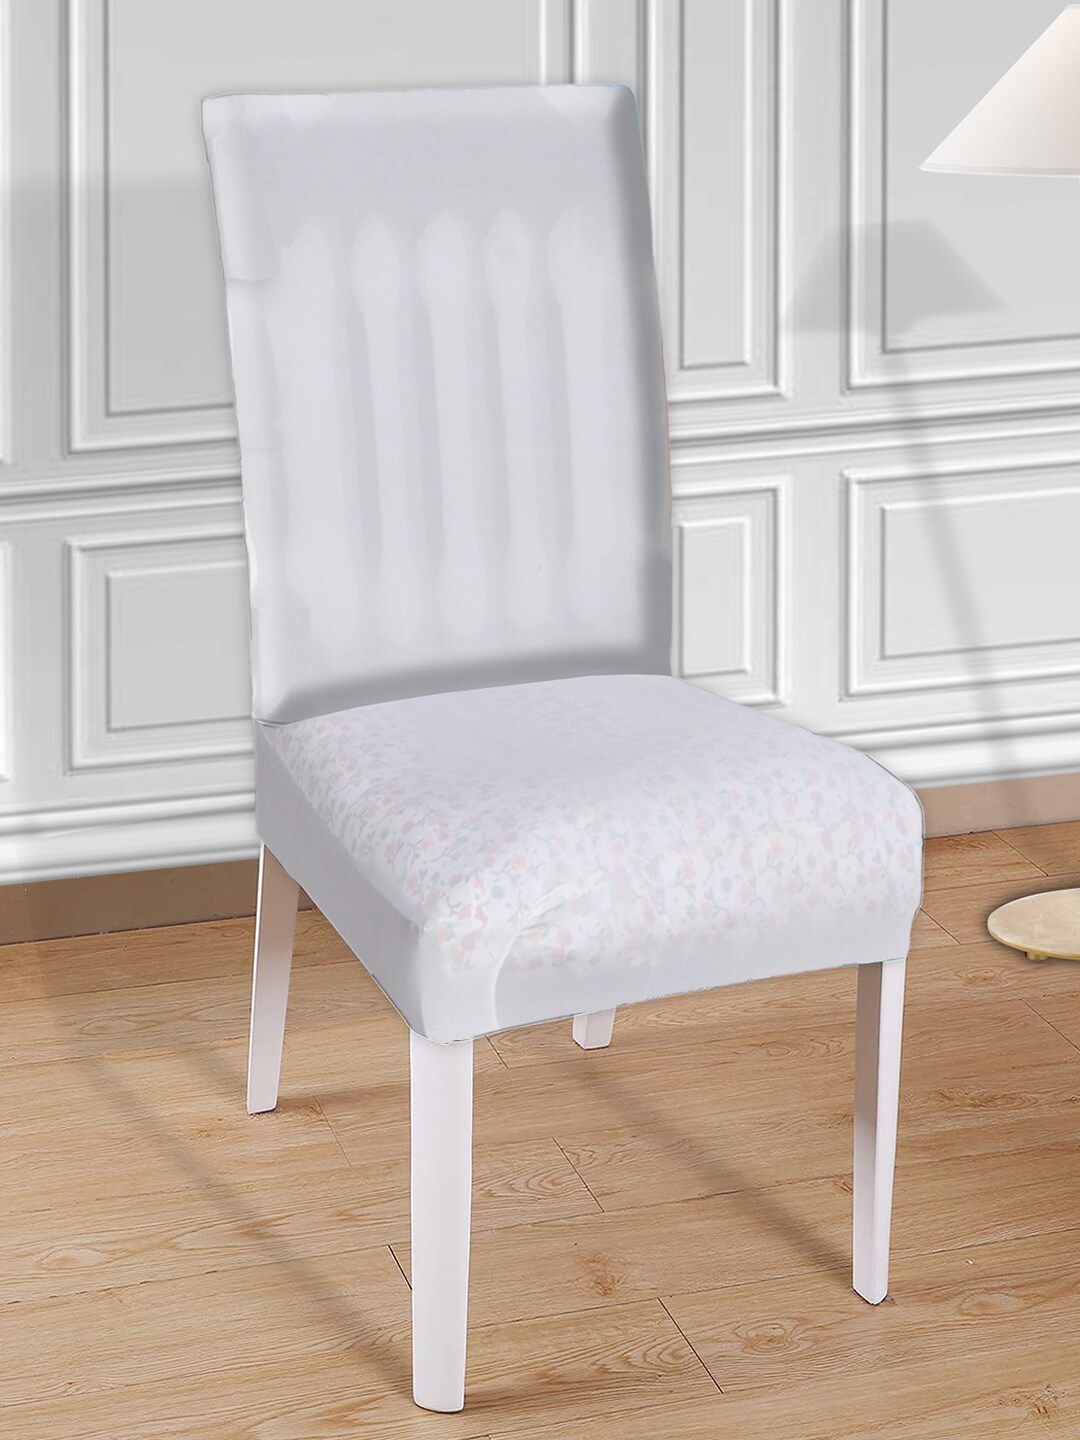 Kuber Industries Set of 4 White Printed Elastic Stretchable Polyester Chair Cover Price in India